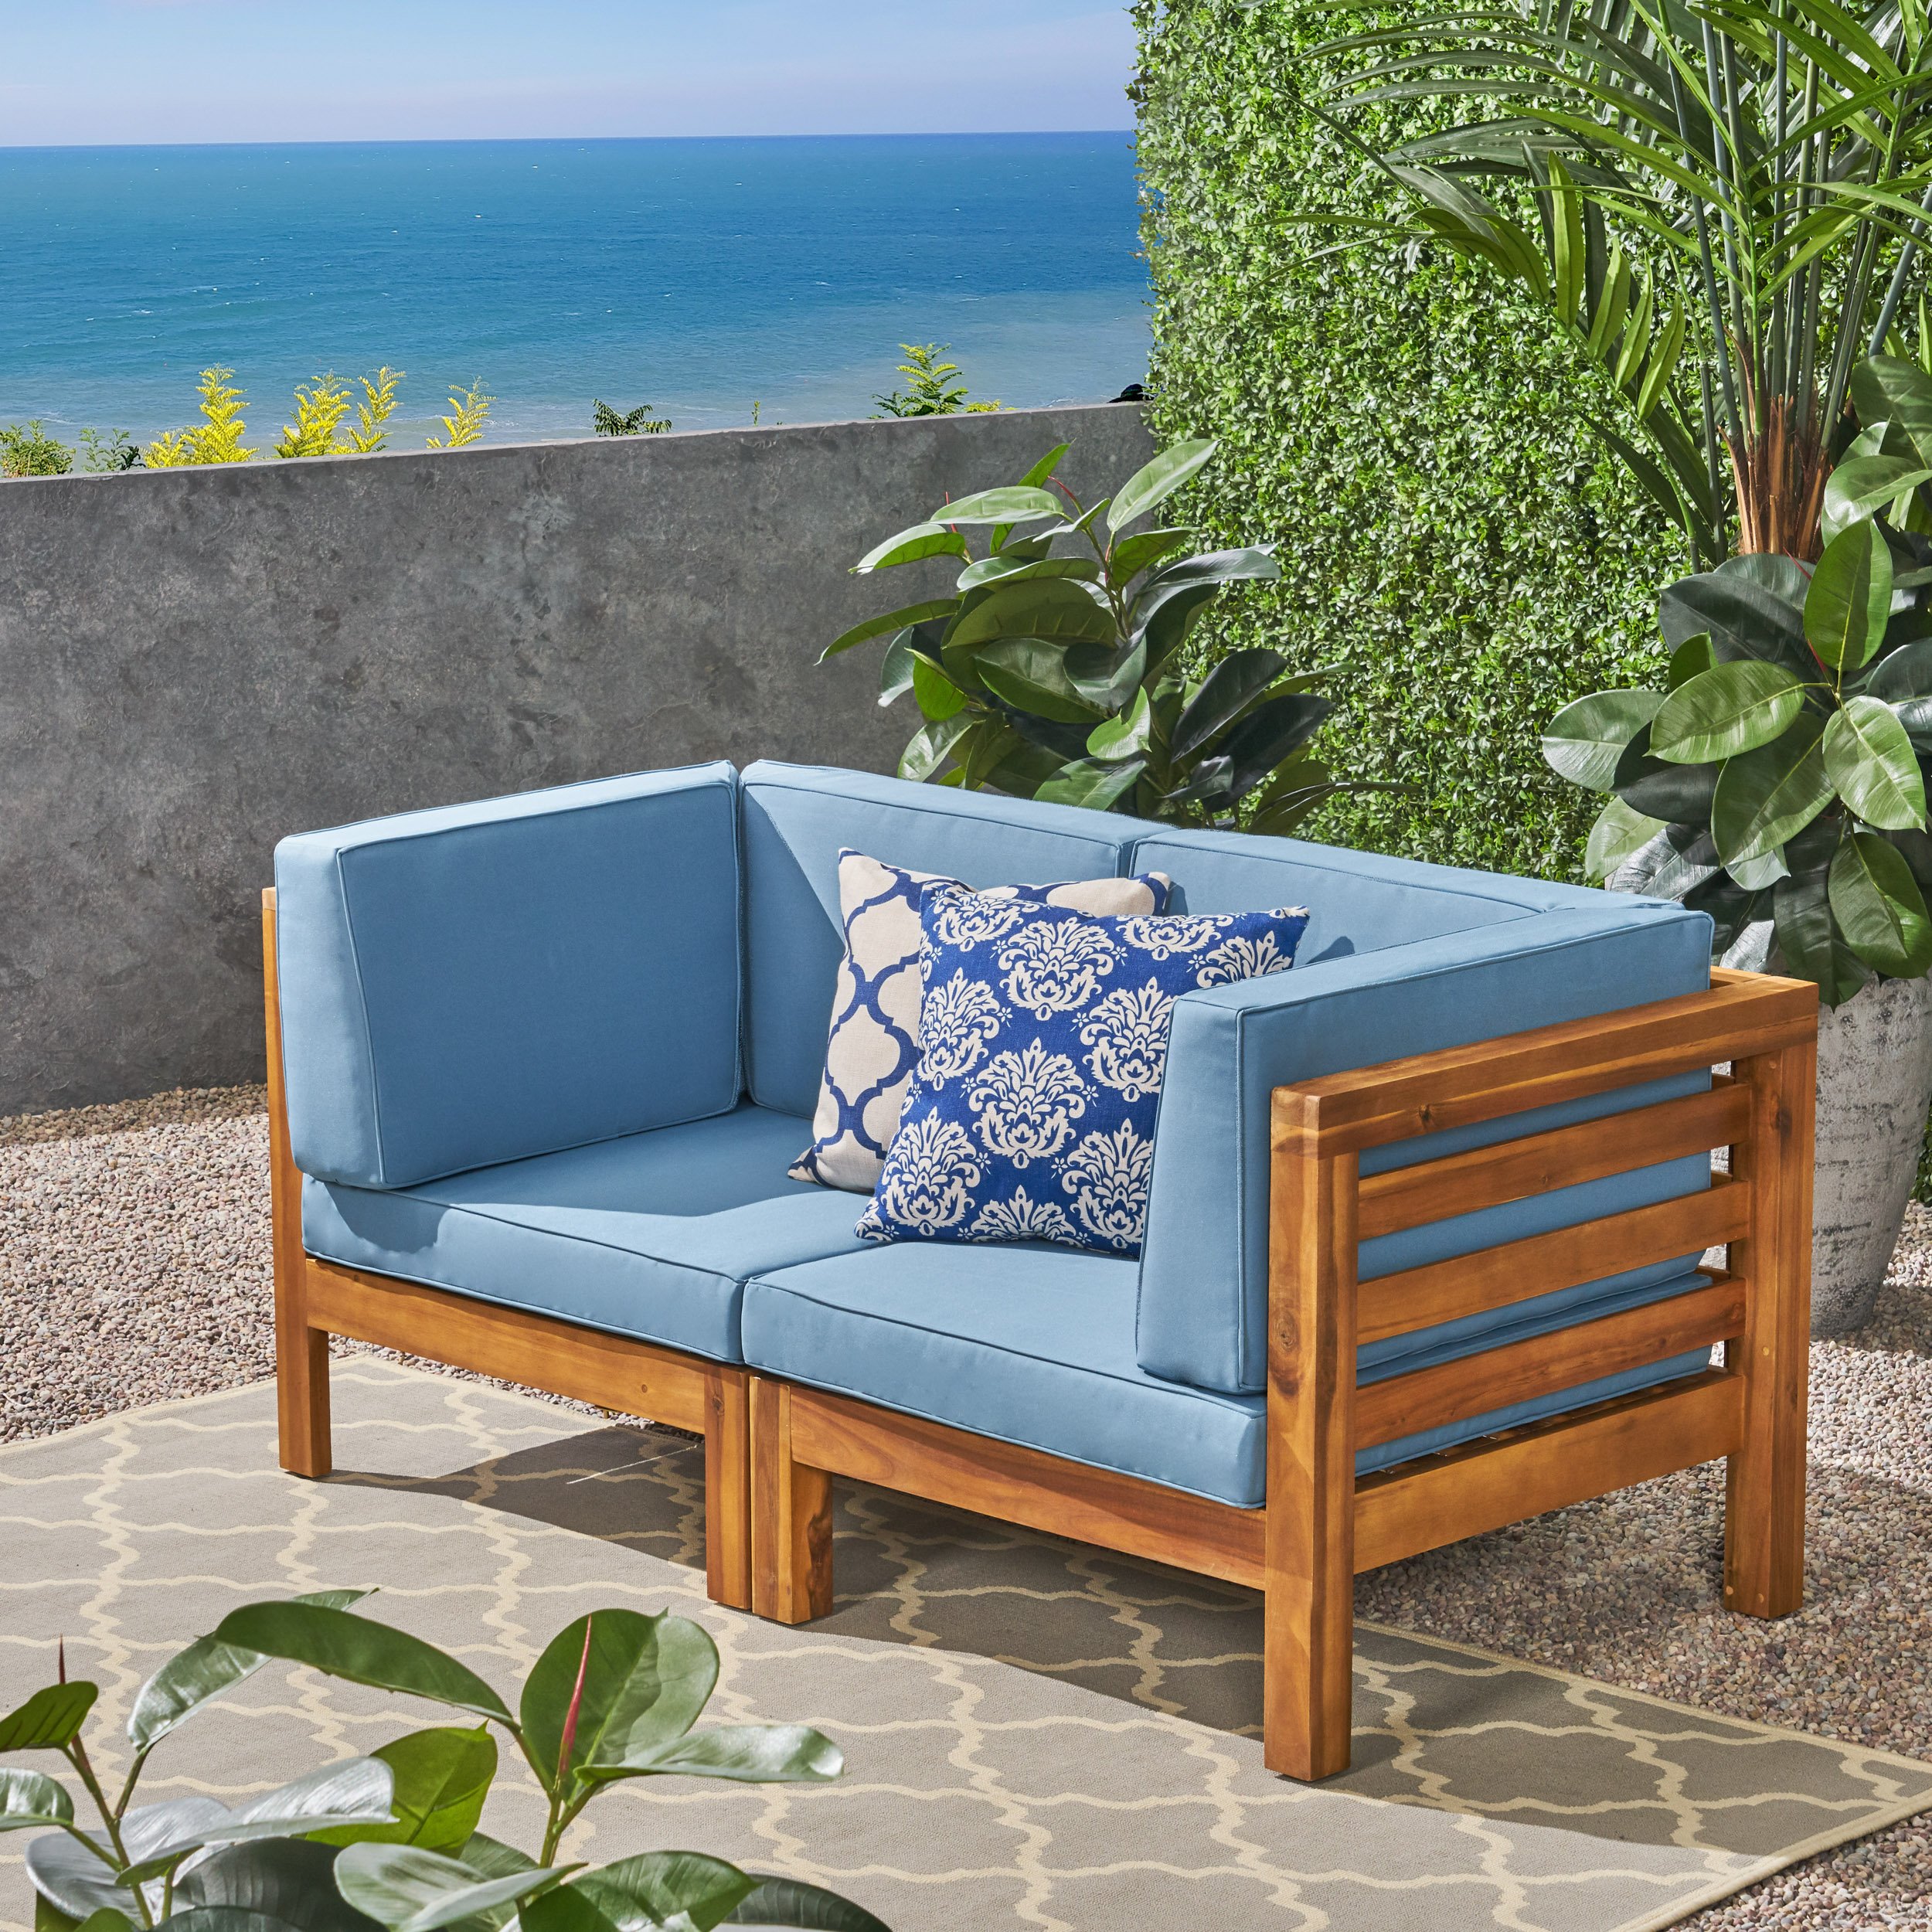 Great Deal Furniture Dawson Outdoor Sectional Loveseat Set - 2-Seater - Acacia Wood - Outdoor Cushions - Teak + Blue